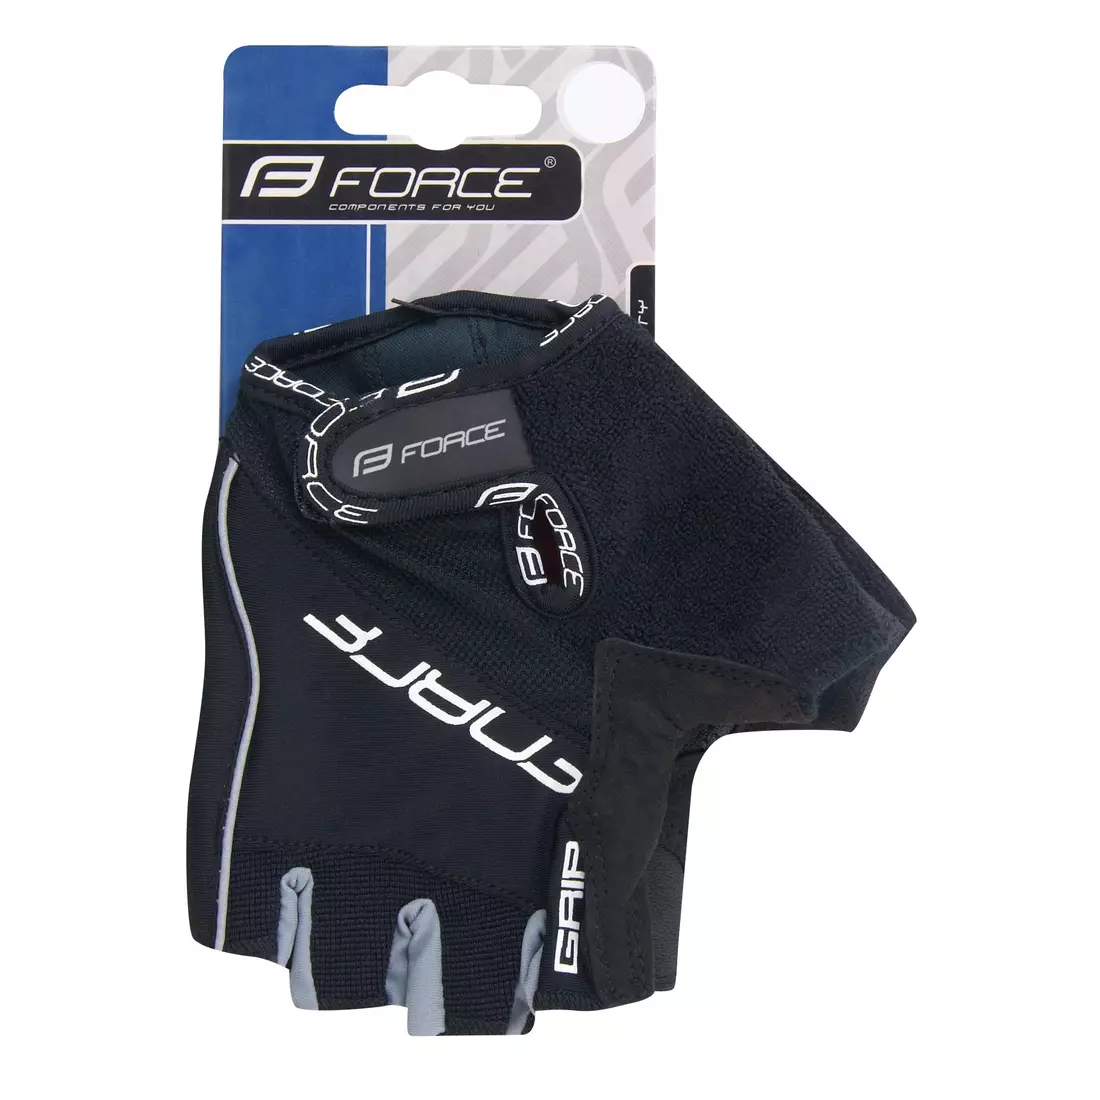 FORCE cycling gloves GRIP, black 905145